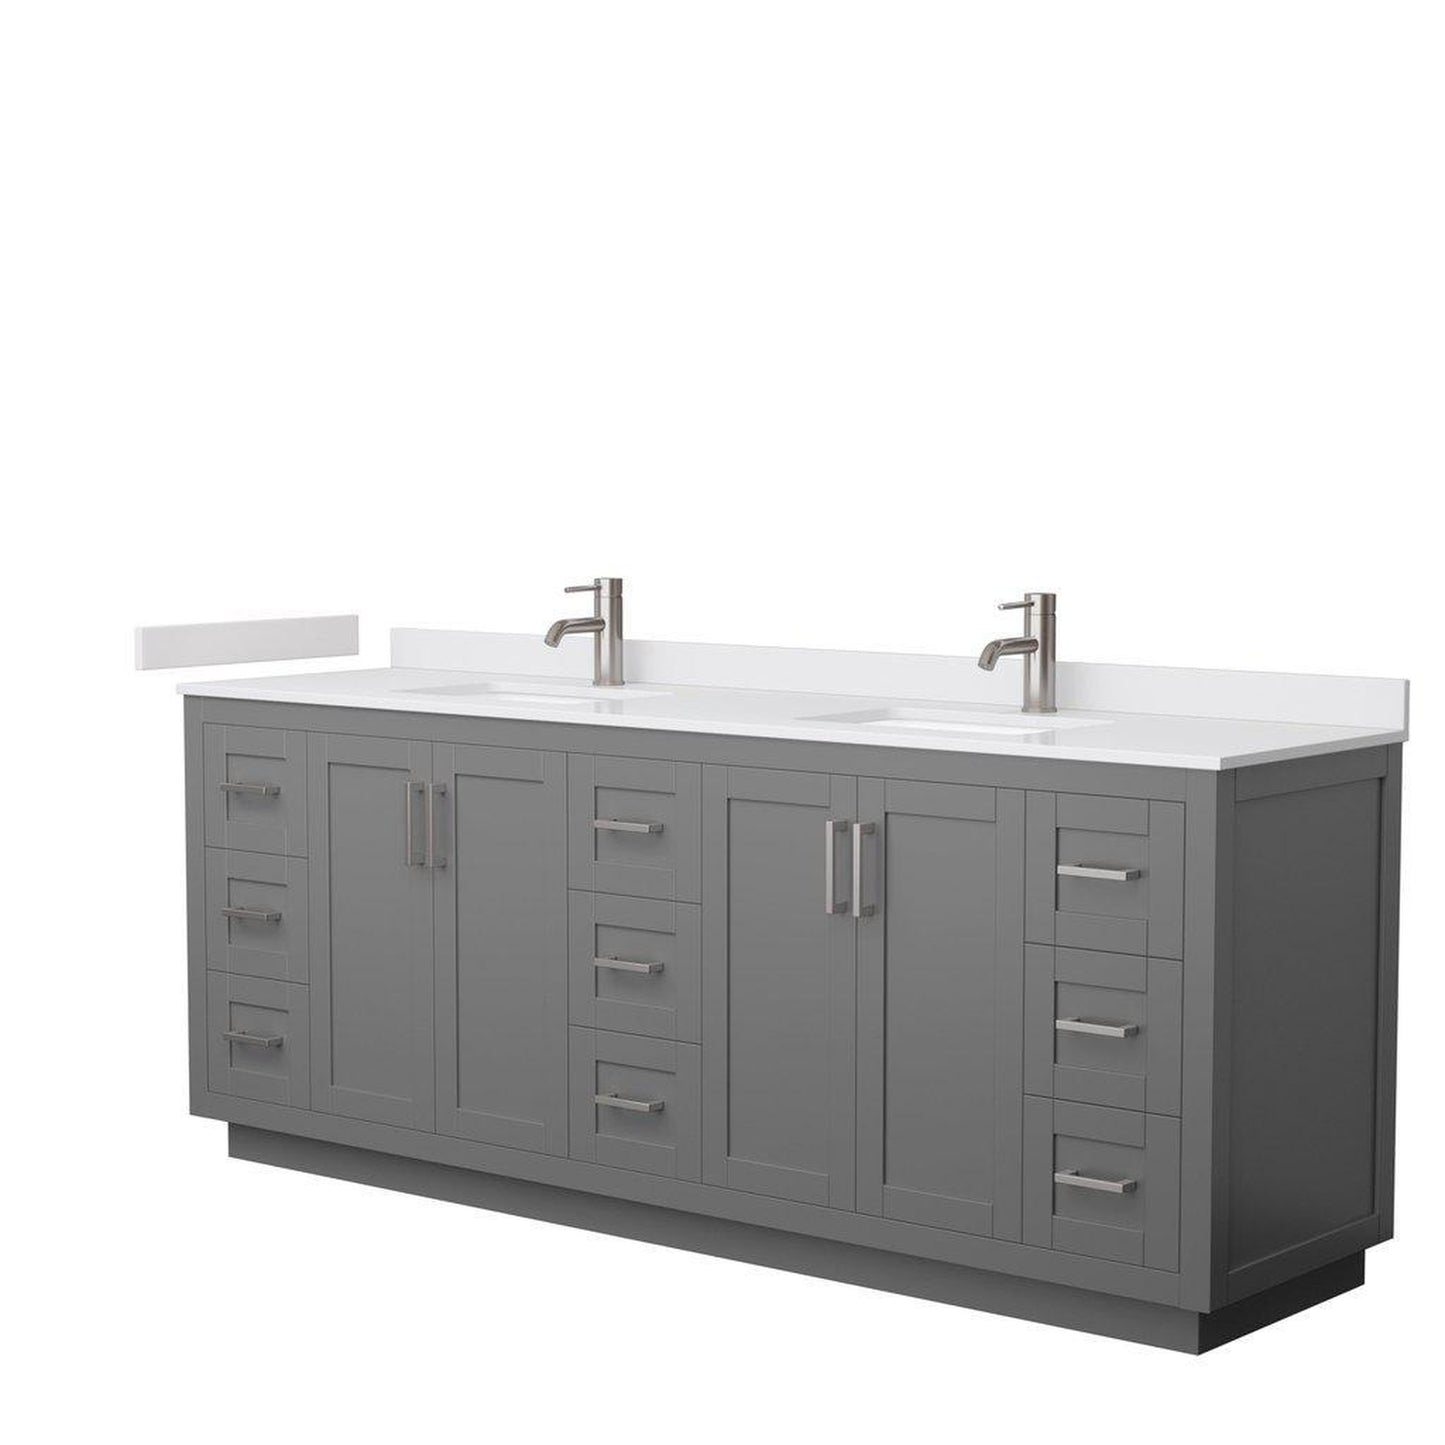 Wyndham Collection Miranda 84" Double Bathroom Dark Gray Vanity Set With White Cultured Marble Countertop, Undermount Square Sink, And Brushed Nickel Trim